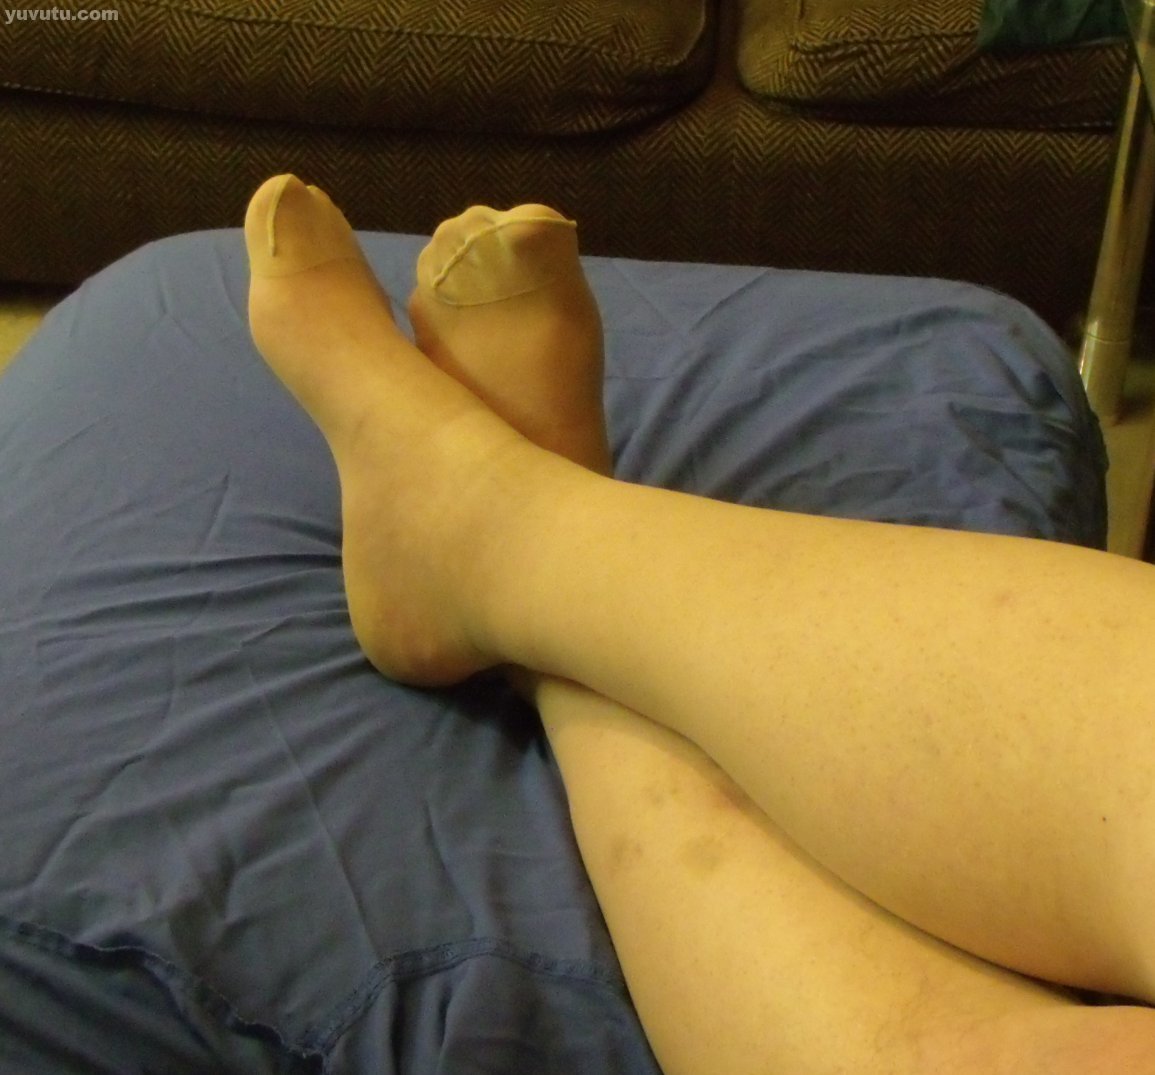 male in tights giving dildo a foot job...